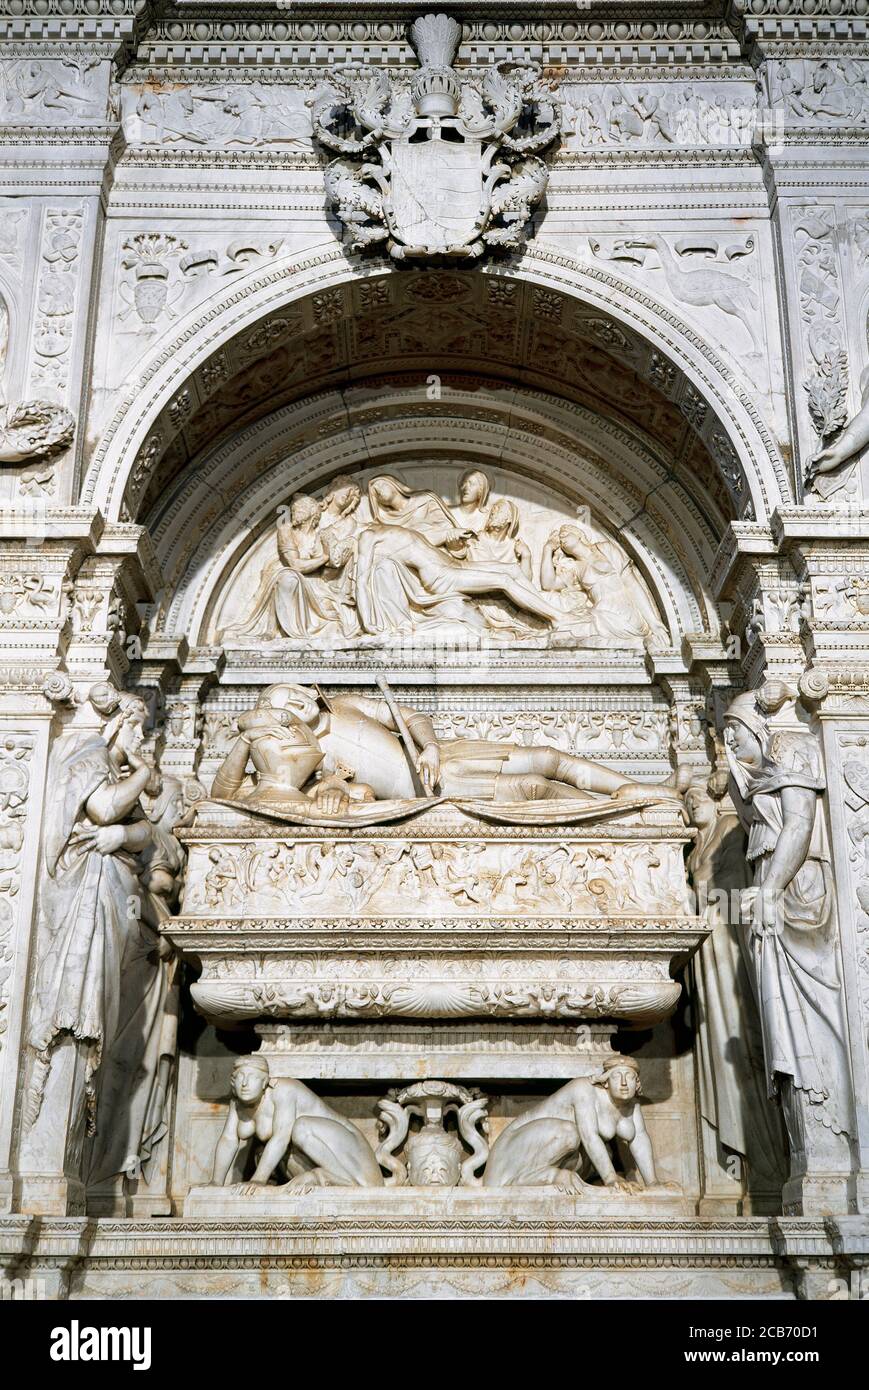 Spain, Catalonia, Lleida province, Bellpuig. St. Nicholas Church. Tomb of the viceroy of Naples Ramon Folch de Cardona i Anglesola (1467-1522). Work by Italian sculptor Giovanni da Nola (1478-1559). When the viceroy Ramón de Cardona died in Naples in 1522, da Nola built his tomb in Naples, but it was then transported piece by piece to Bellpuig where Cardona was buried. Stock Photo